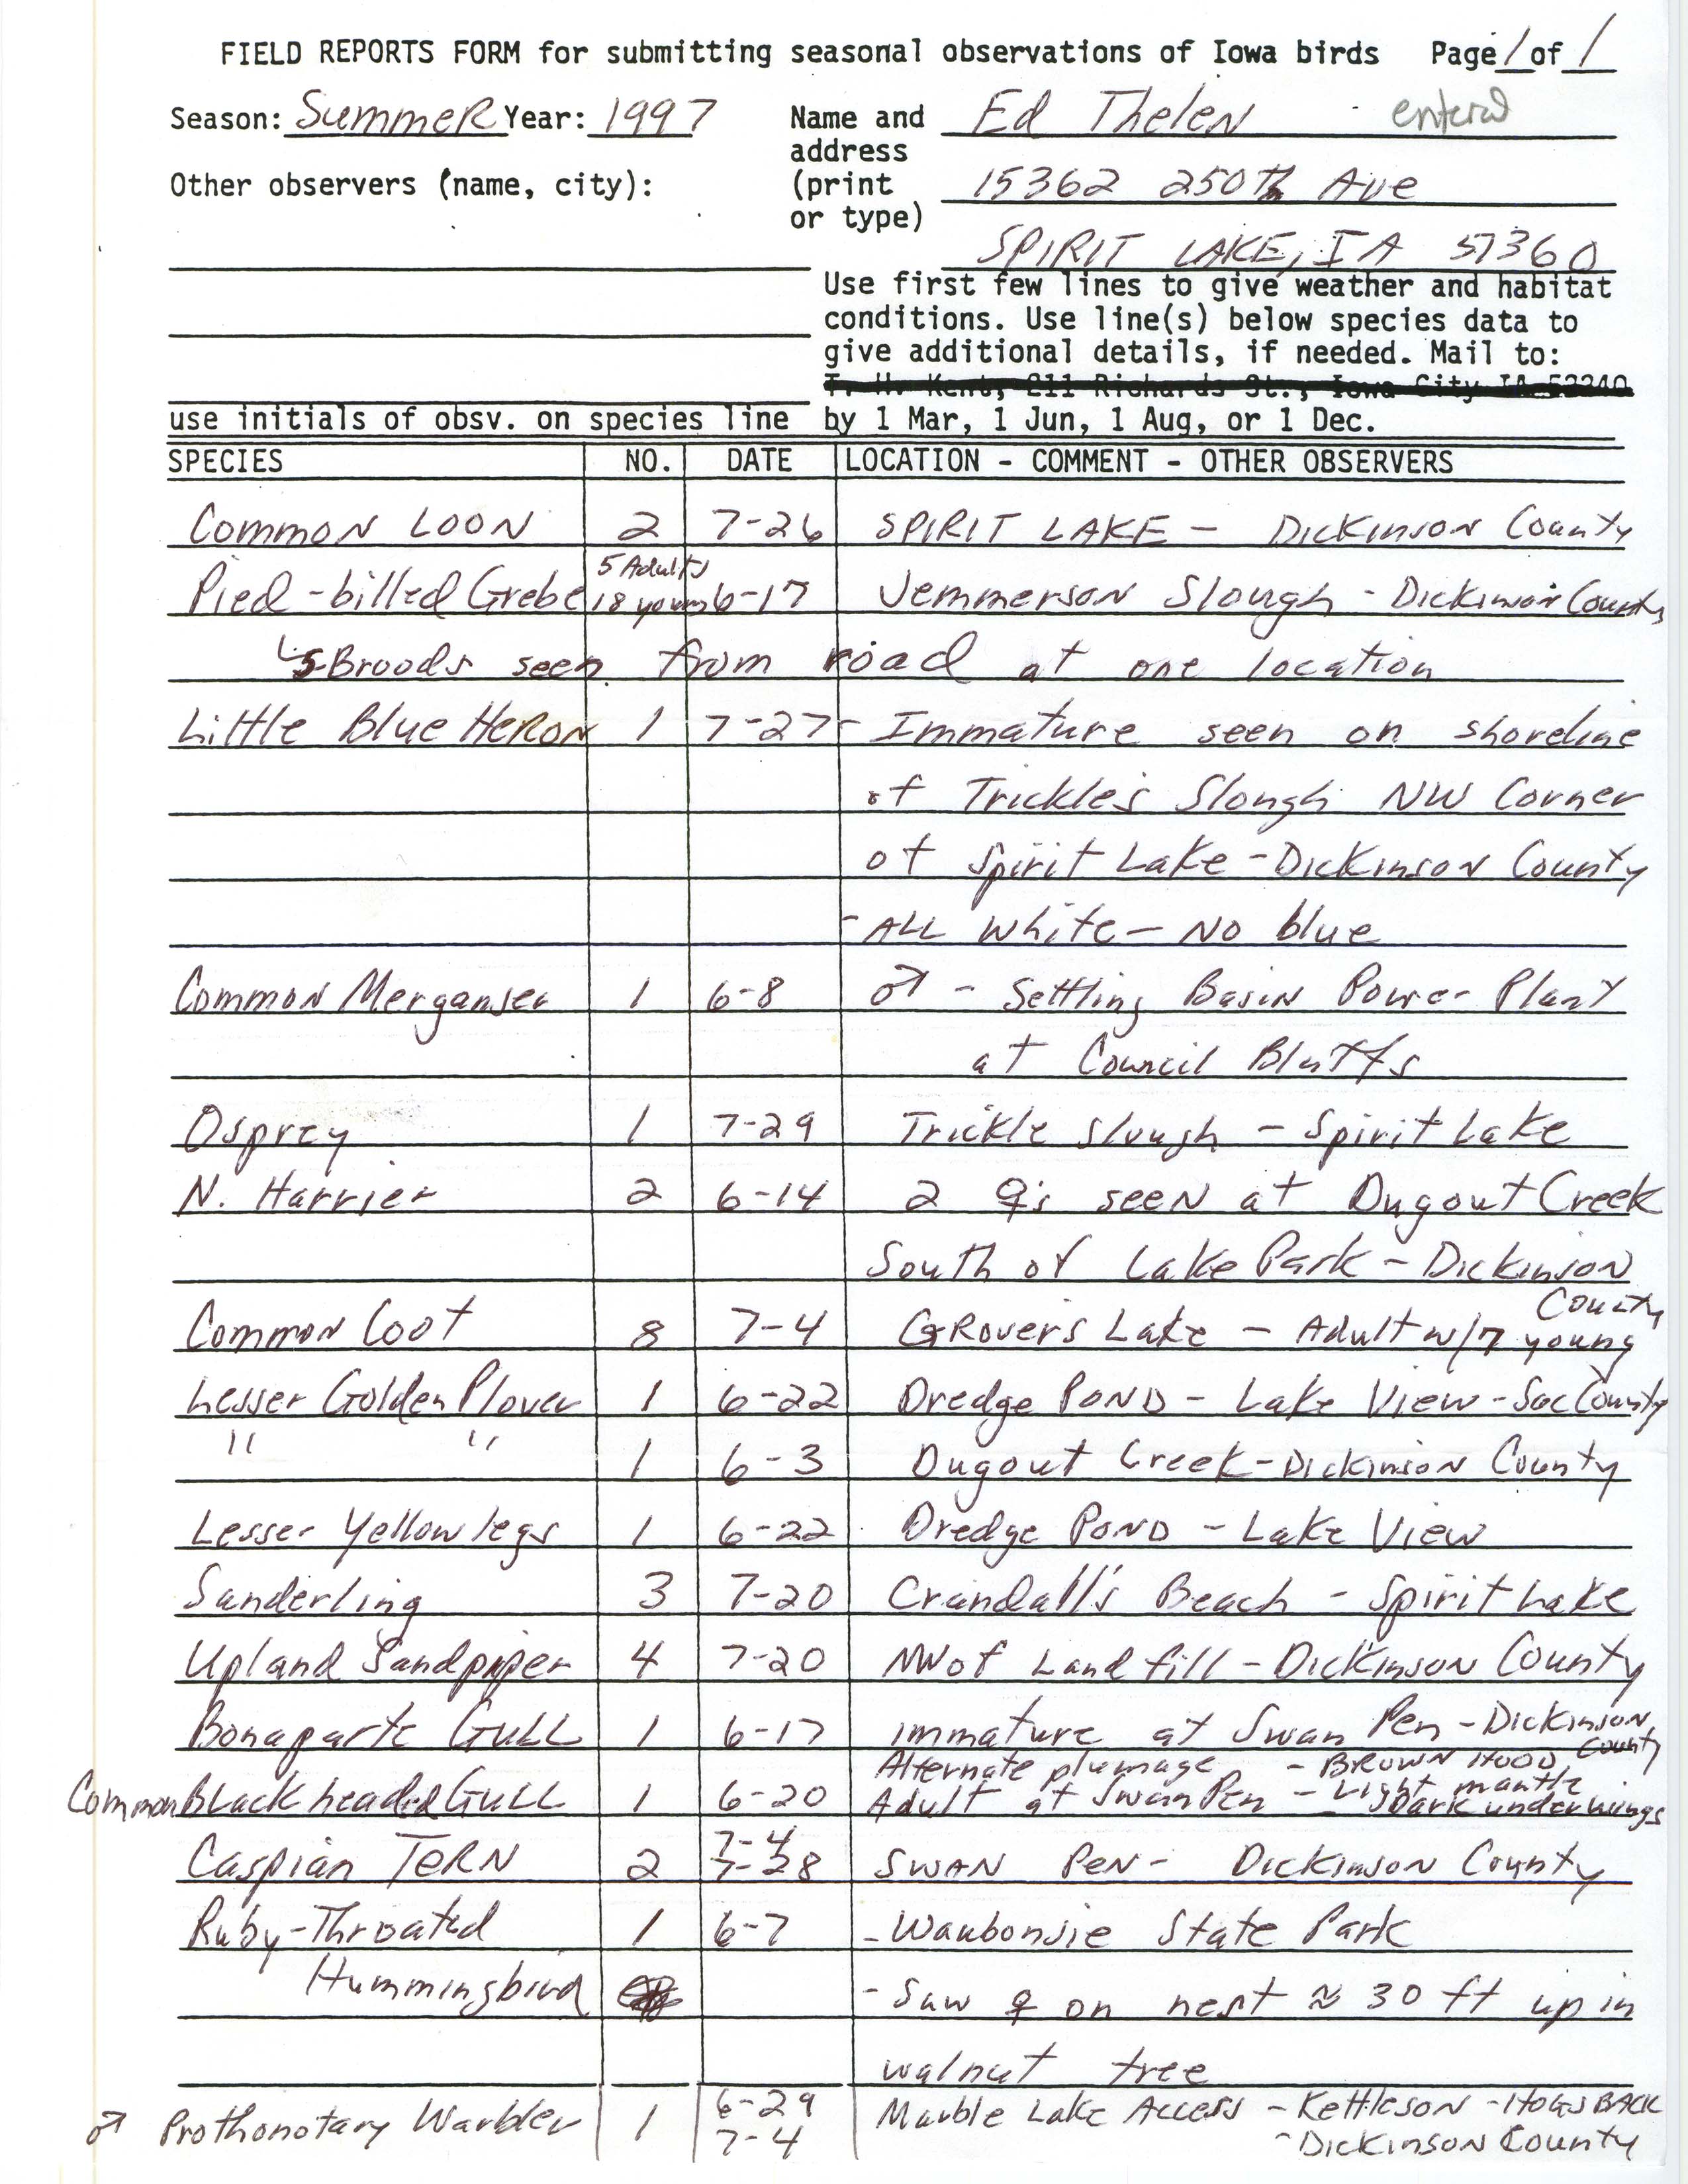 Field reports form for submitting seasonal observations of Iowa birds, Ed Thelen, summer 1997